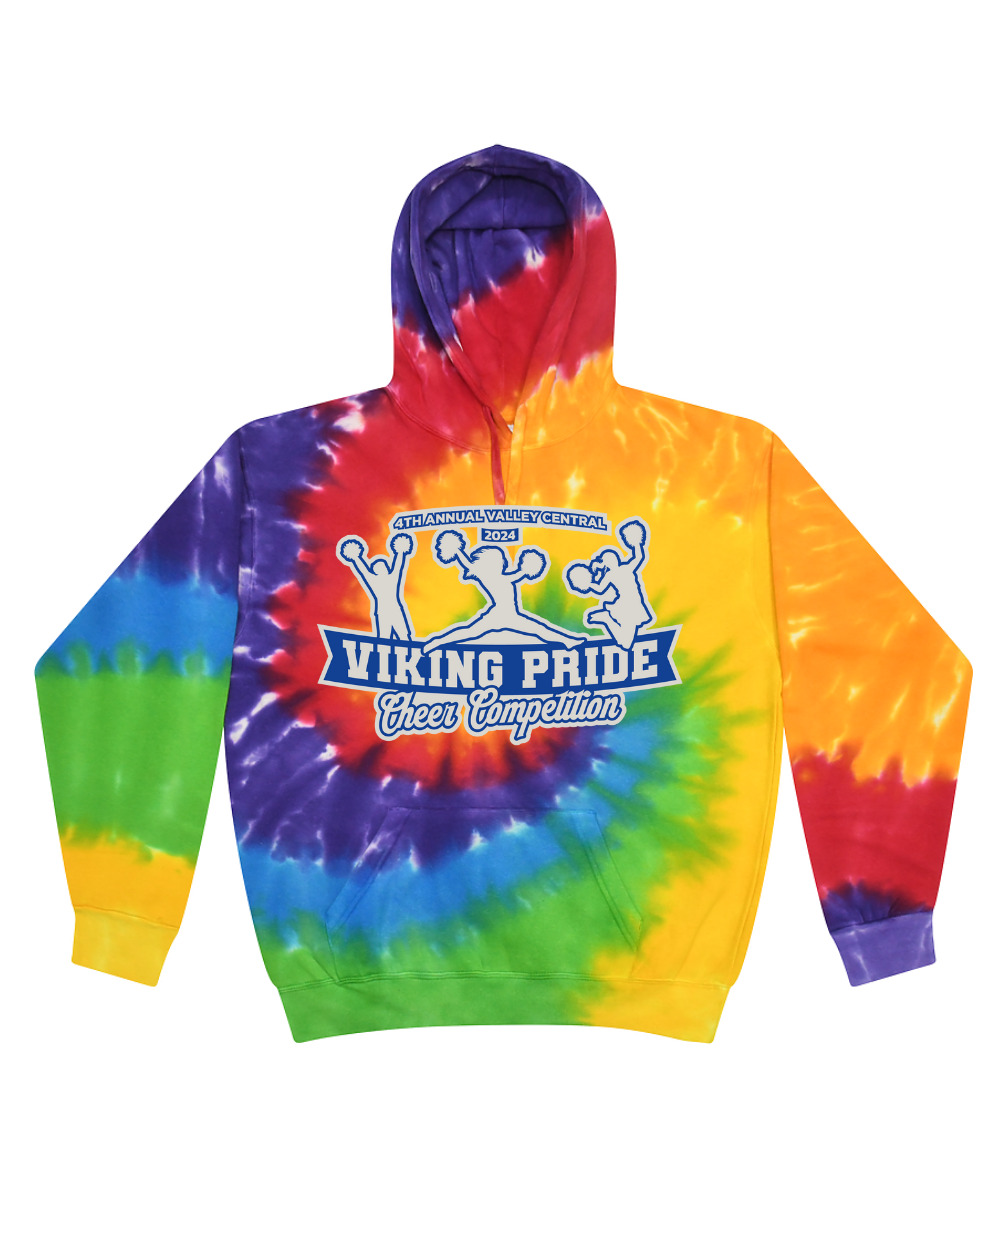 4th Annual Center Valley Viking Pride Cheer Competition - Tie Dye Hoodies